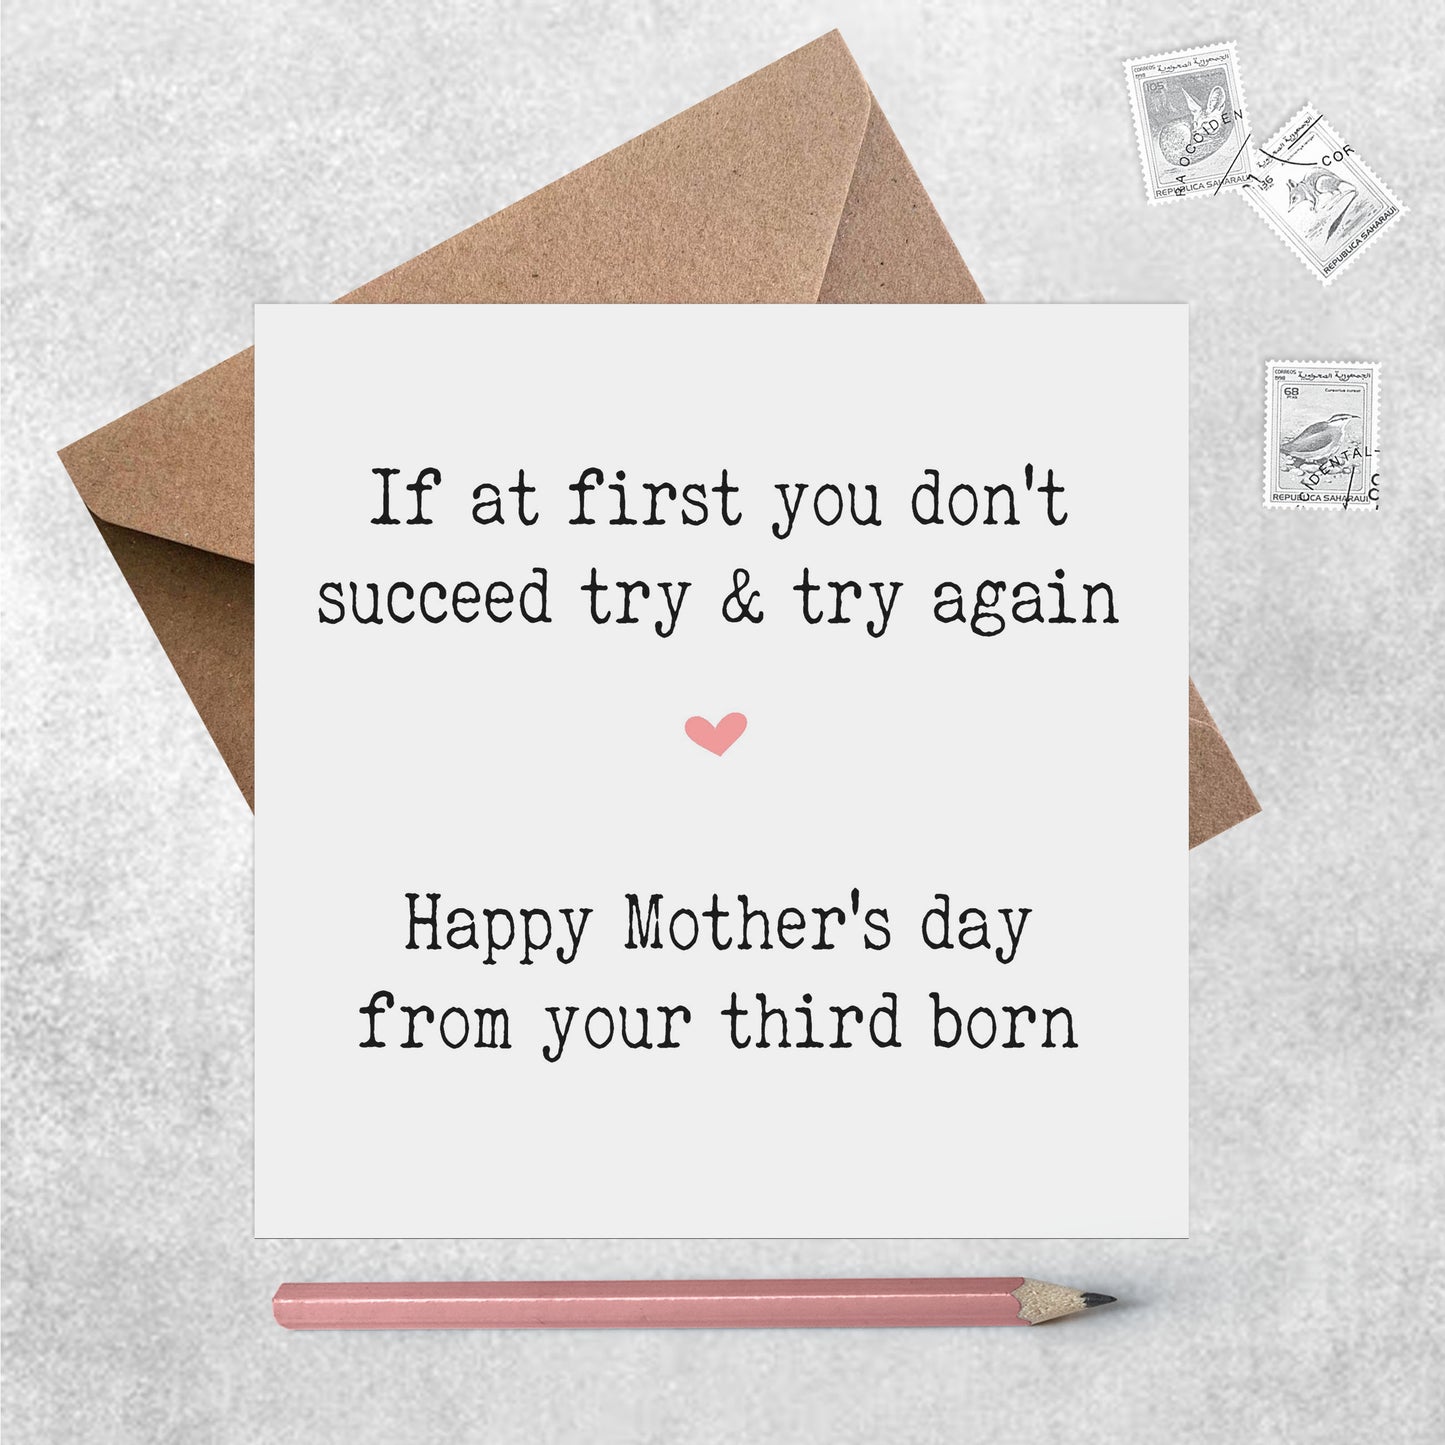 If At First You Don't Succeed Try Again, Funny Mother's Day Card From 3rd Born,